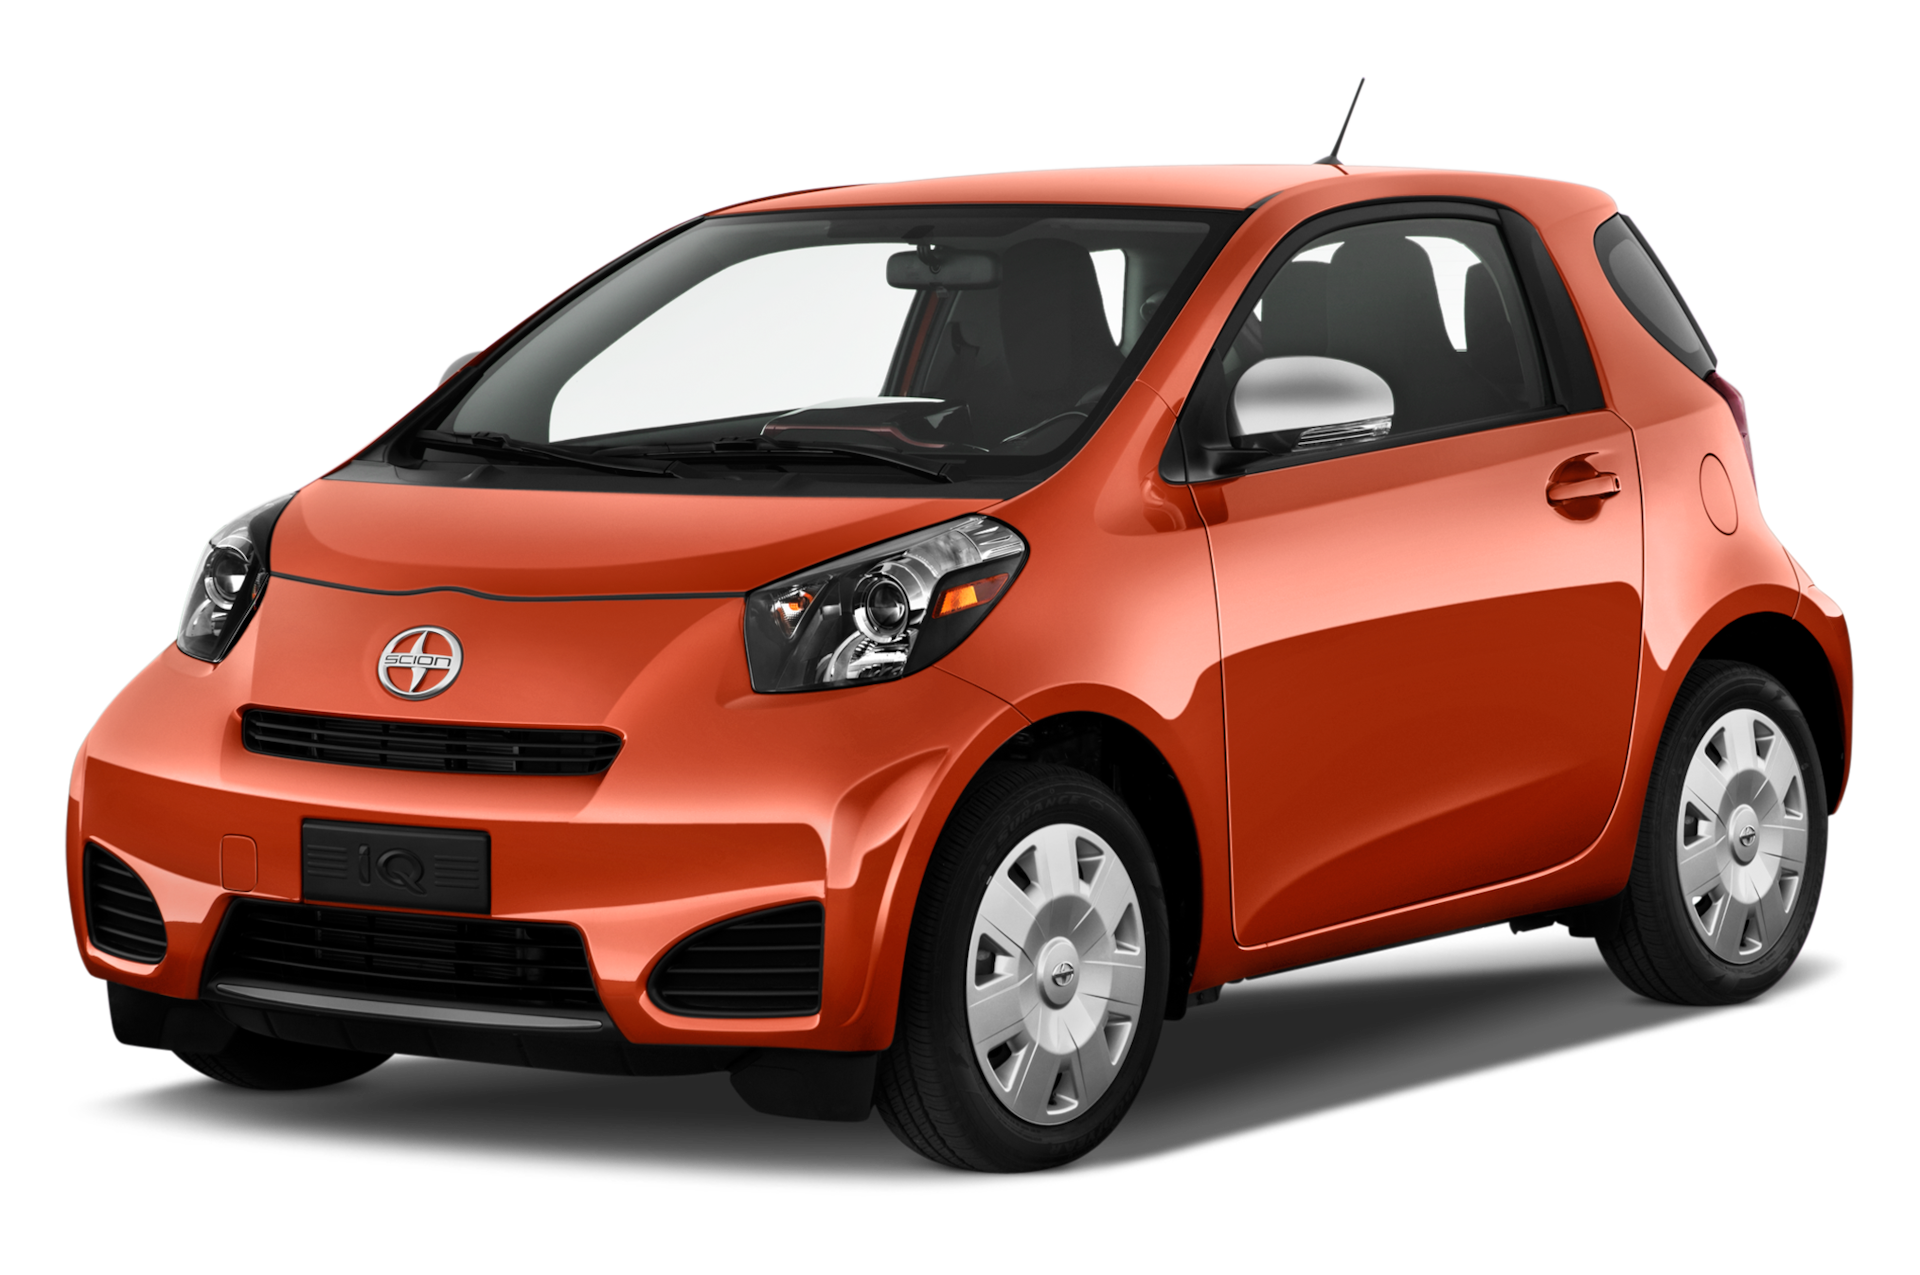 2014 Scion IQ Prices, Reviews, and Photos - MotorTrend